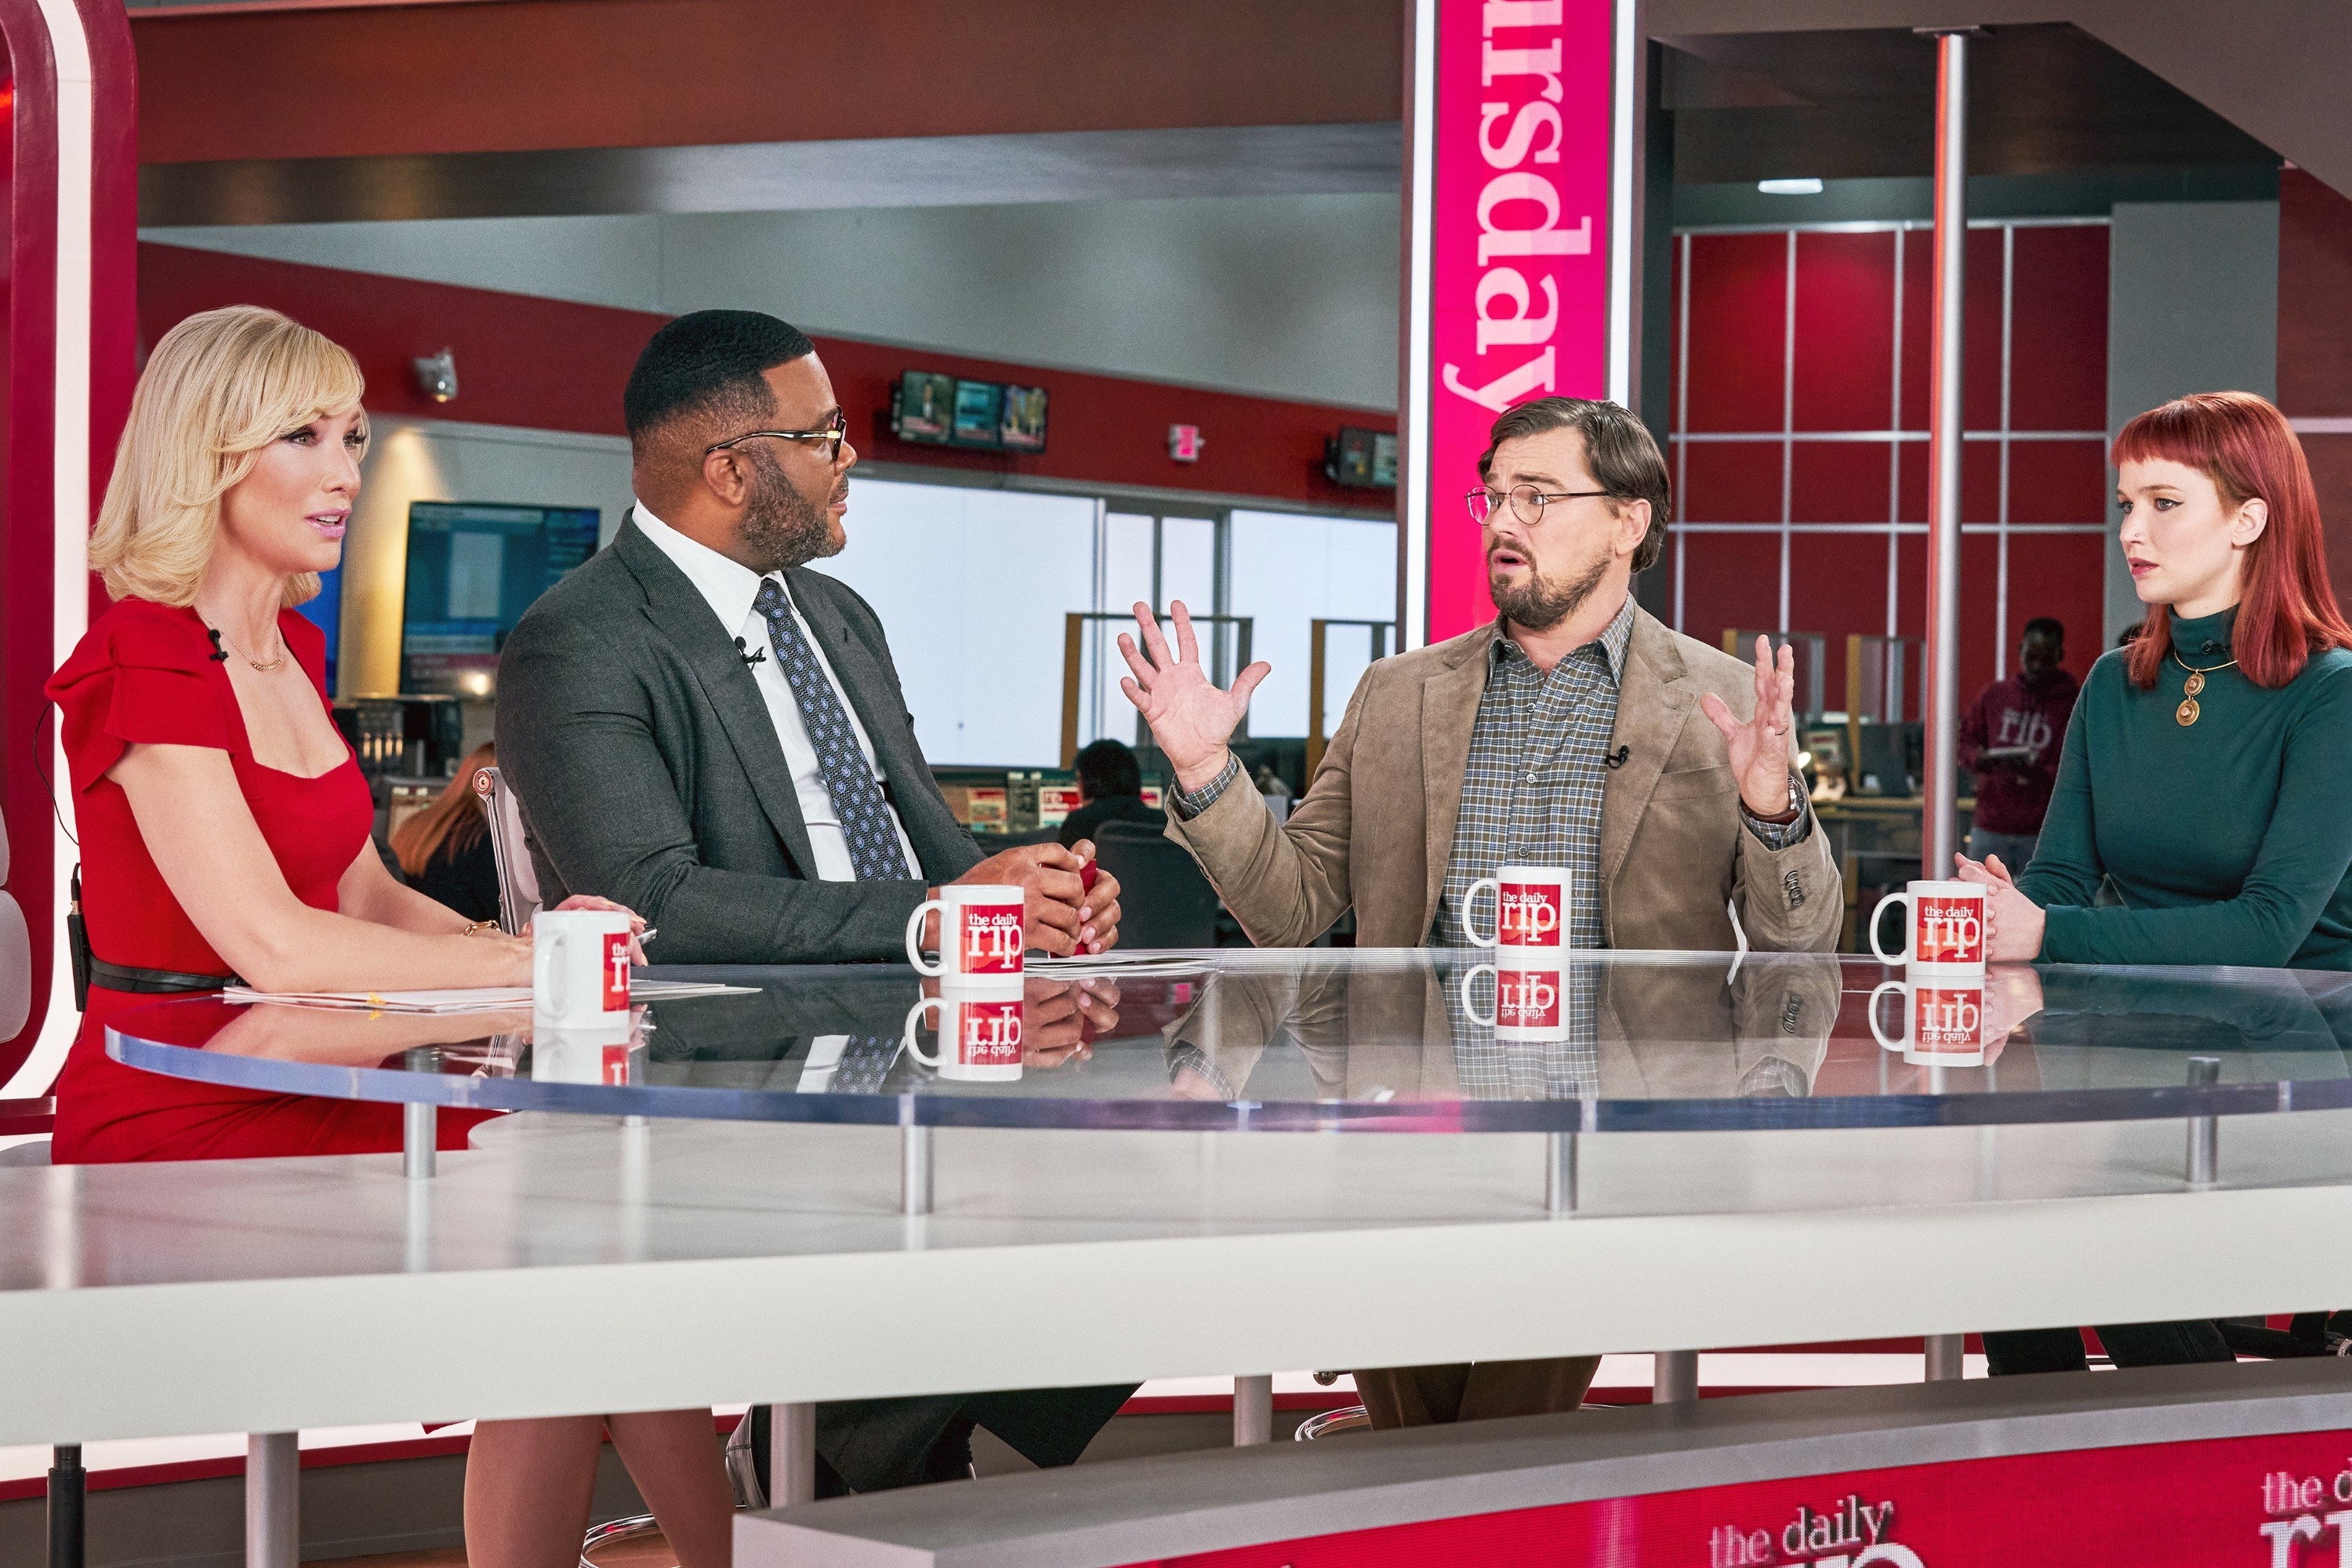 Cate Blanchett, Tyler Perry, Leonardo DiCaprio, and Jennifer Lawrence sit at a newsroom table during a live interview in a scene from the film